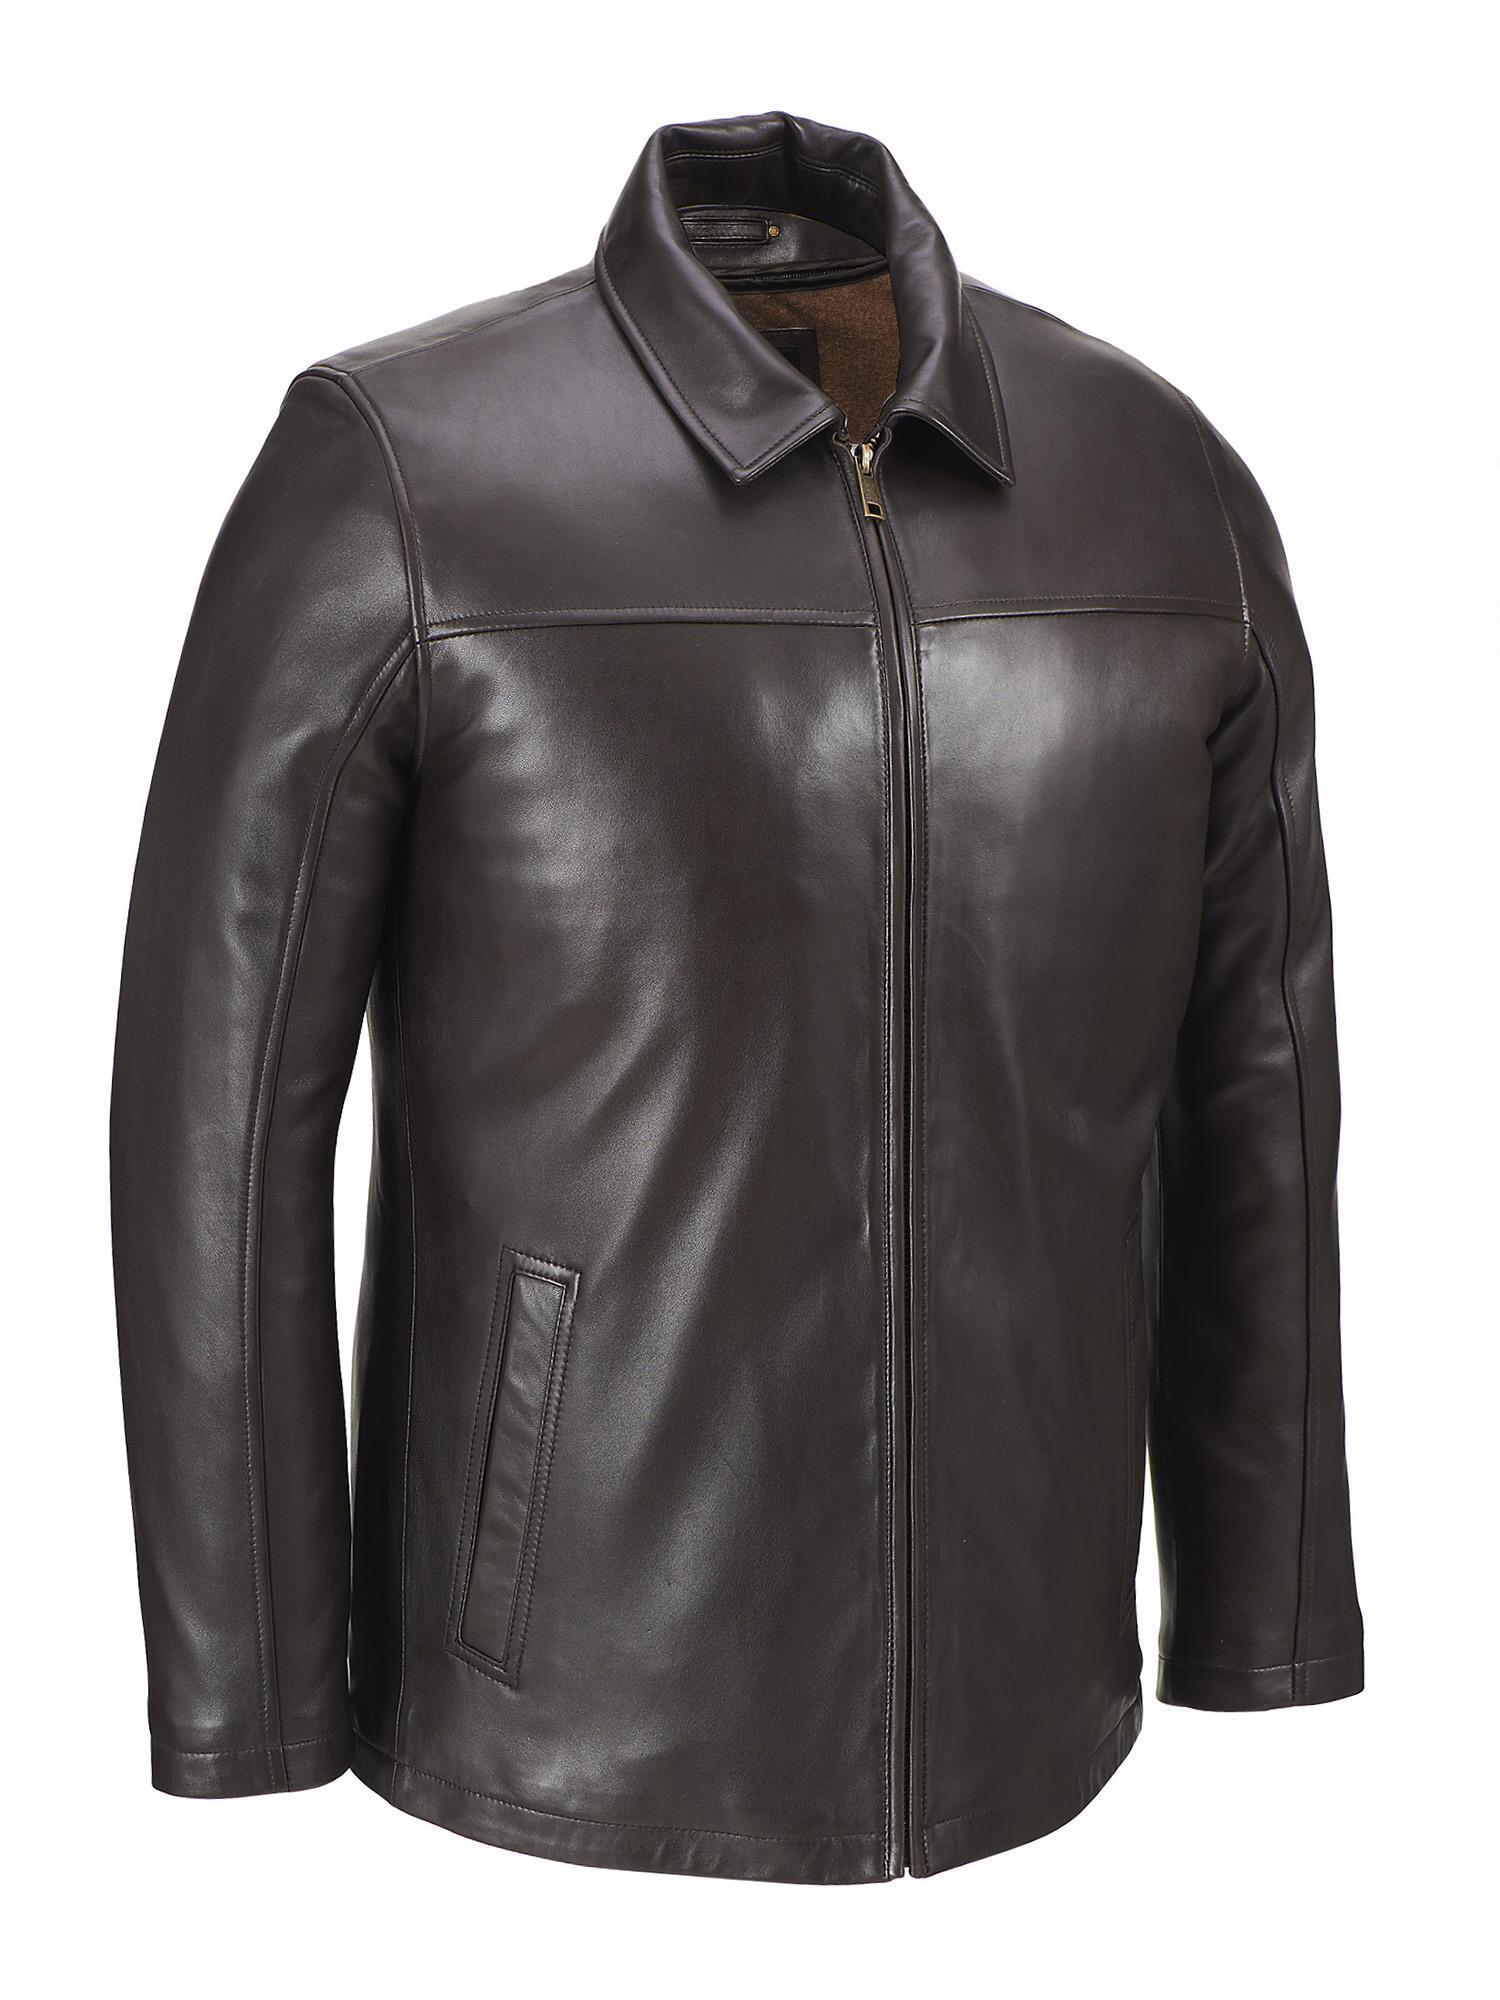 Wilsons Leather Bruce Leather Jacket With Thinsulatetm Lining in Brown